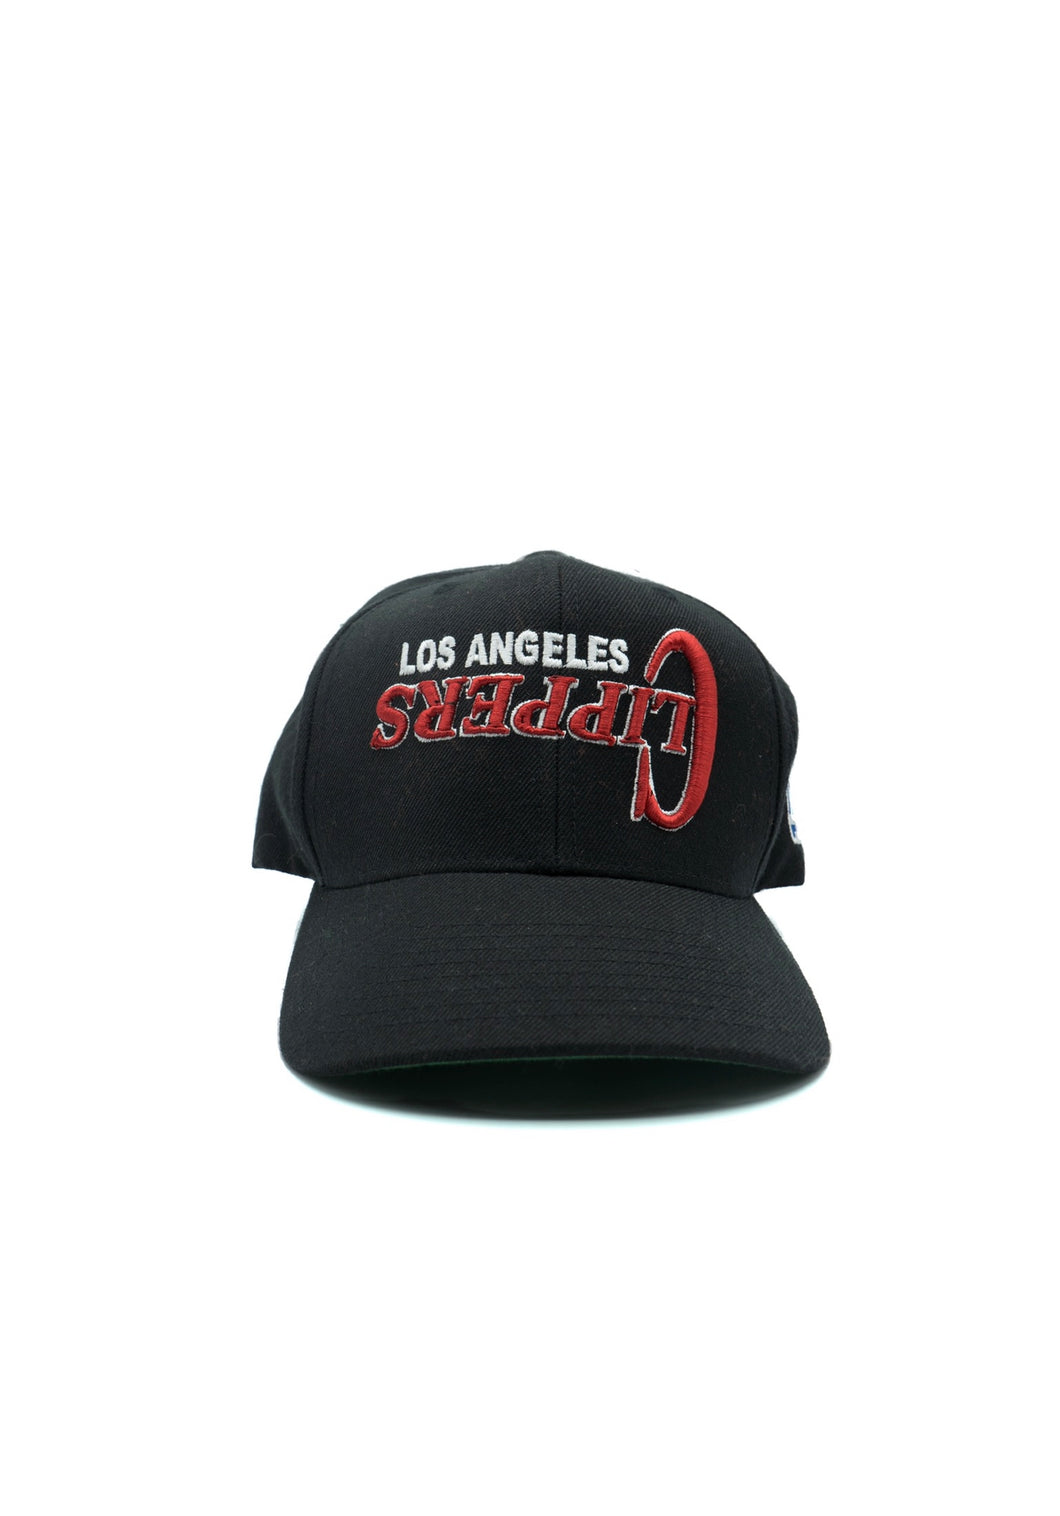 Clippers - Snapback